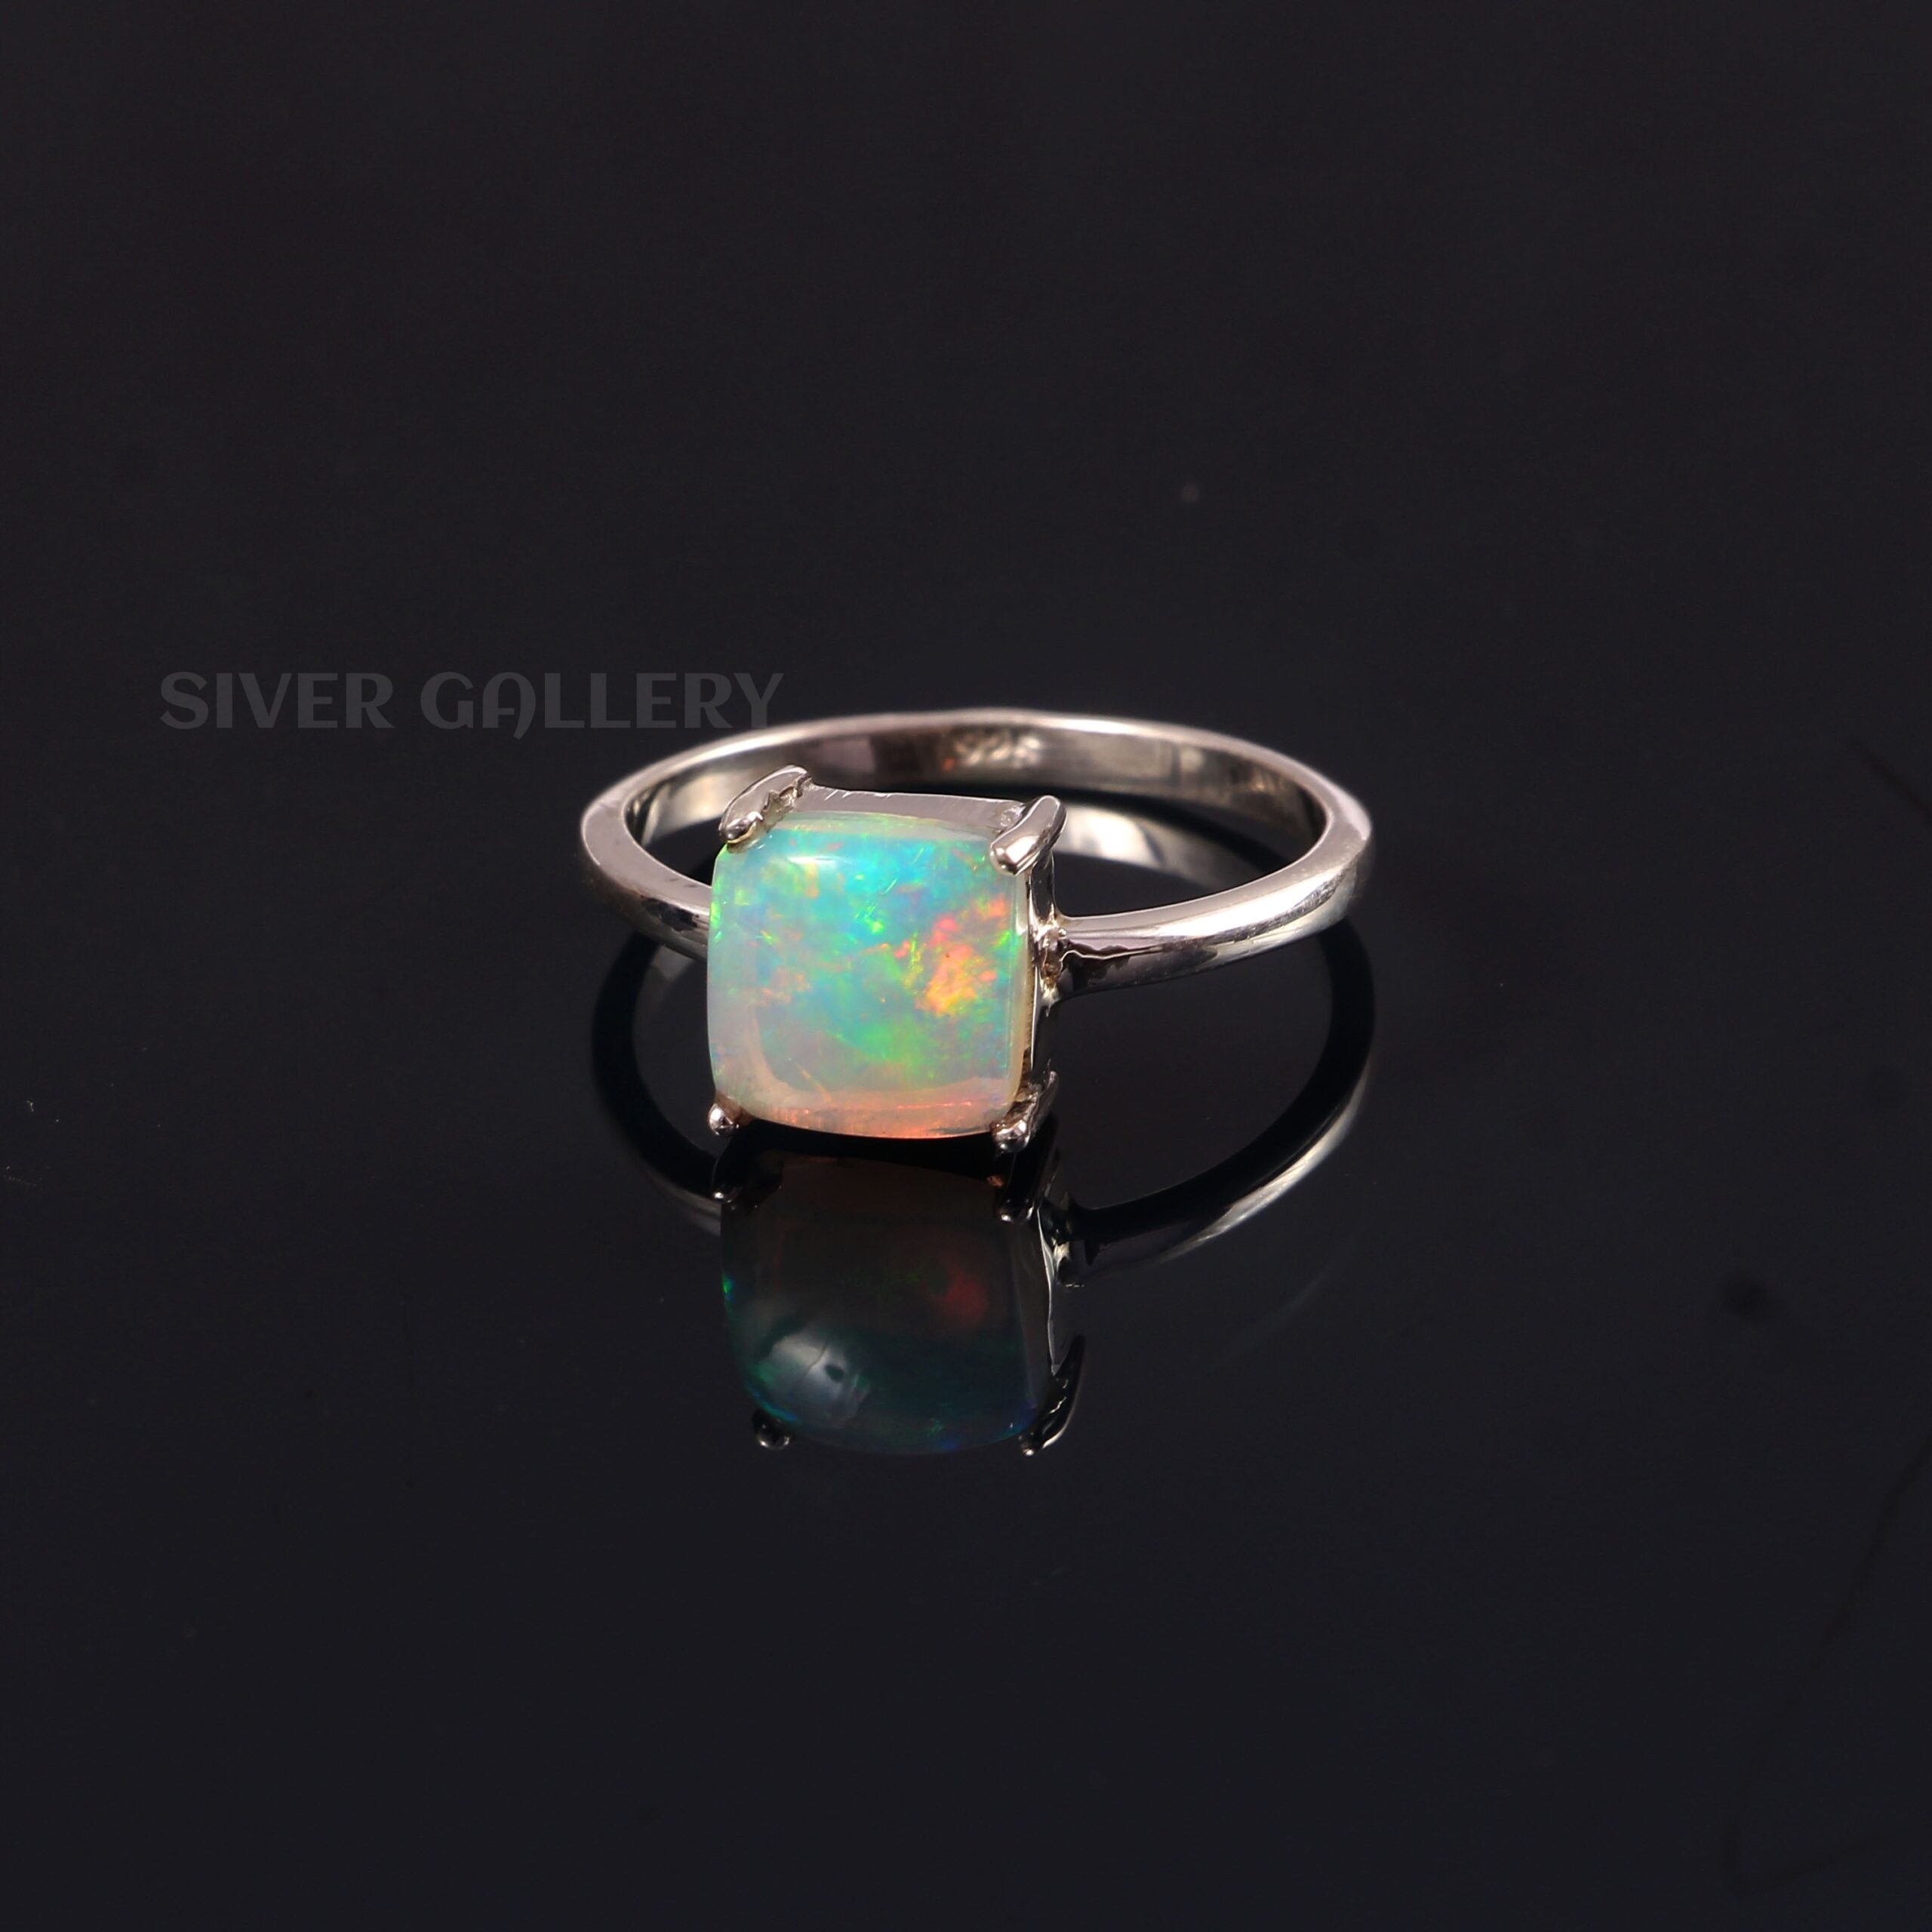 Ethiopian Opal 925 Sterling Silver Ring ~ Natural Opal Fancy Ring ~ Statement Ring ~ Boho Ring ~ Gemstone Ring ~Dainty Handmade Ring For Her